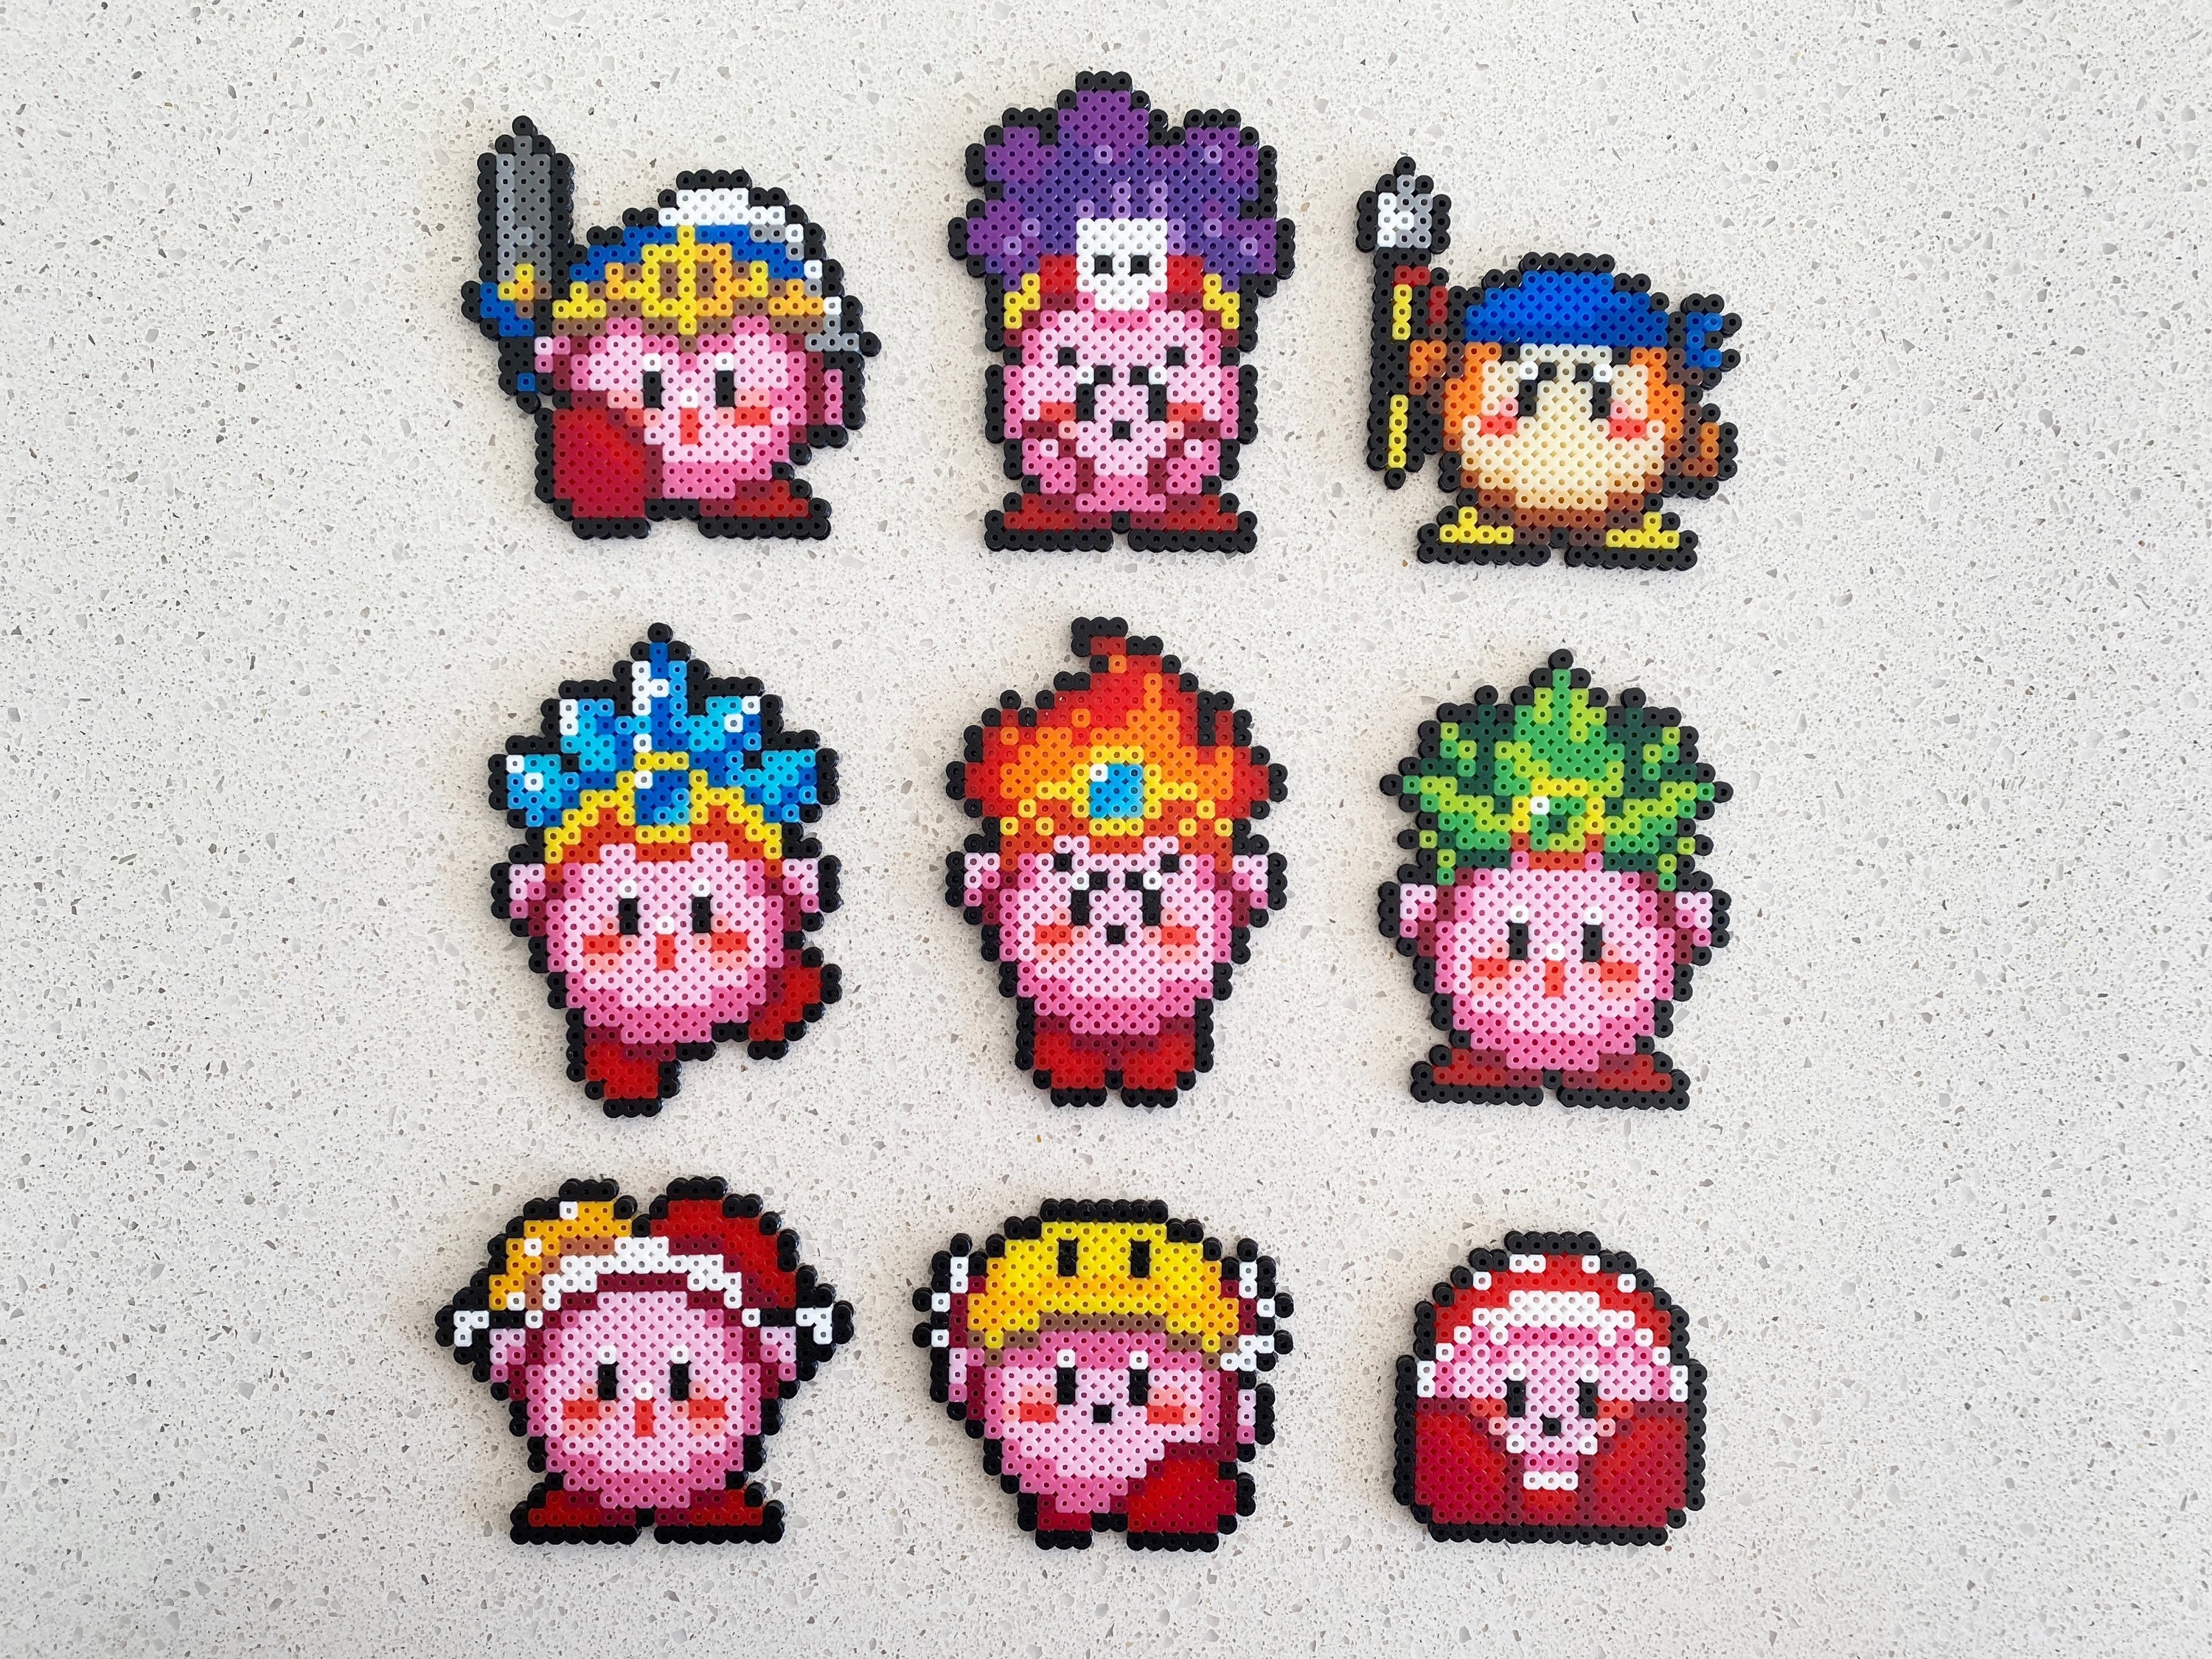 Mario Themed Perler Bead Patterns – For Parents,Teachers, Scout Leaders &  Really Just Everyone!